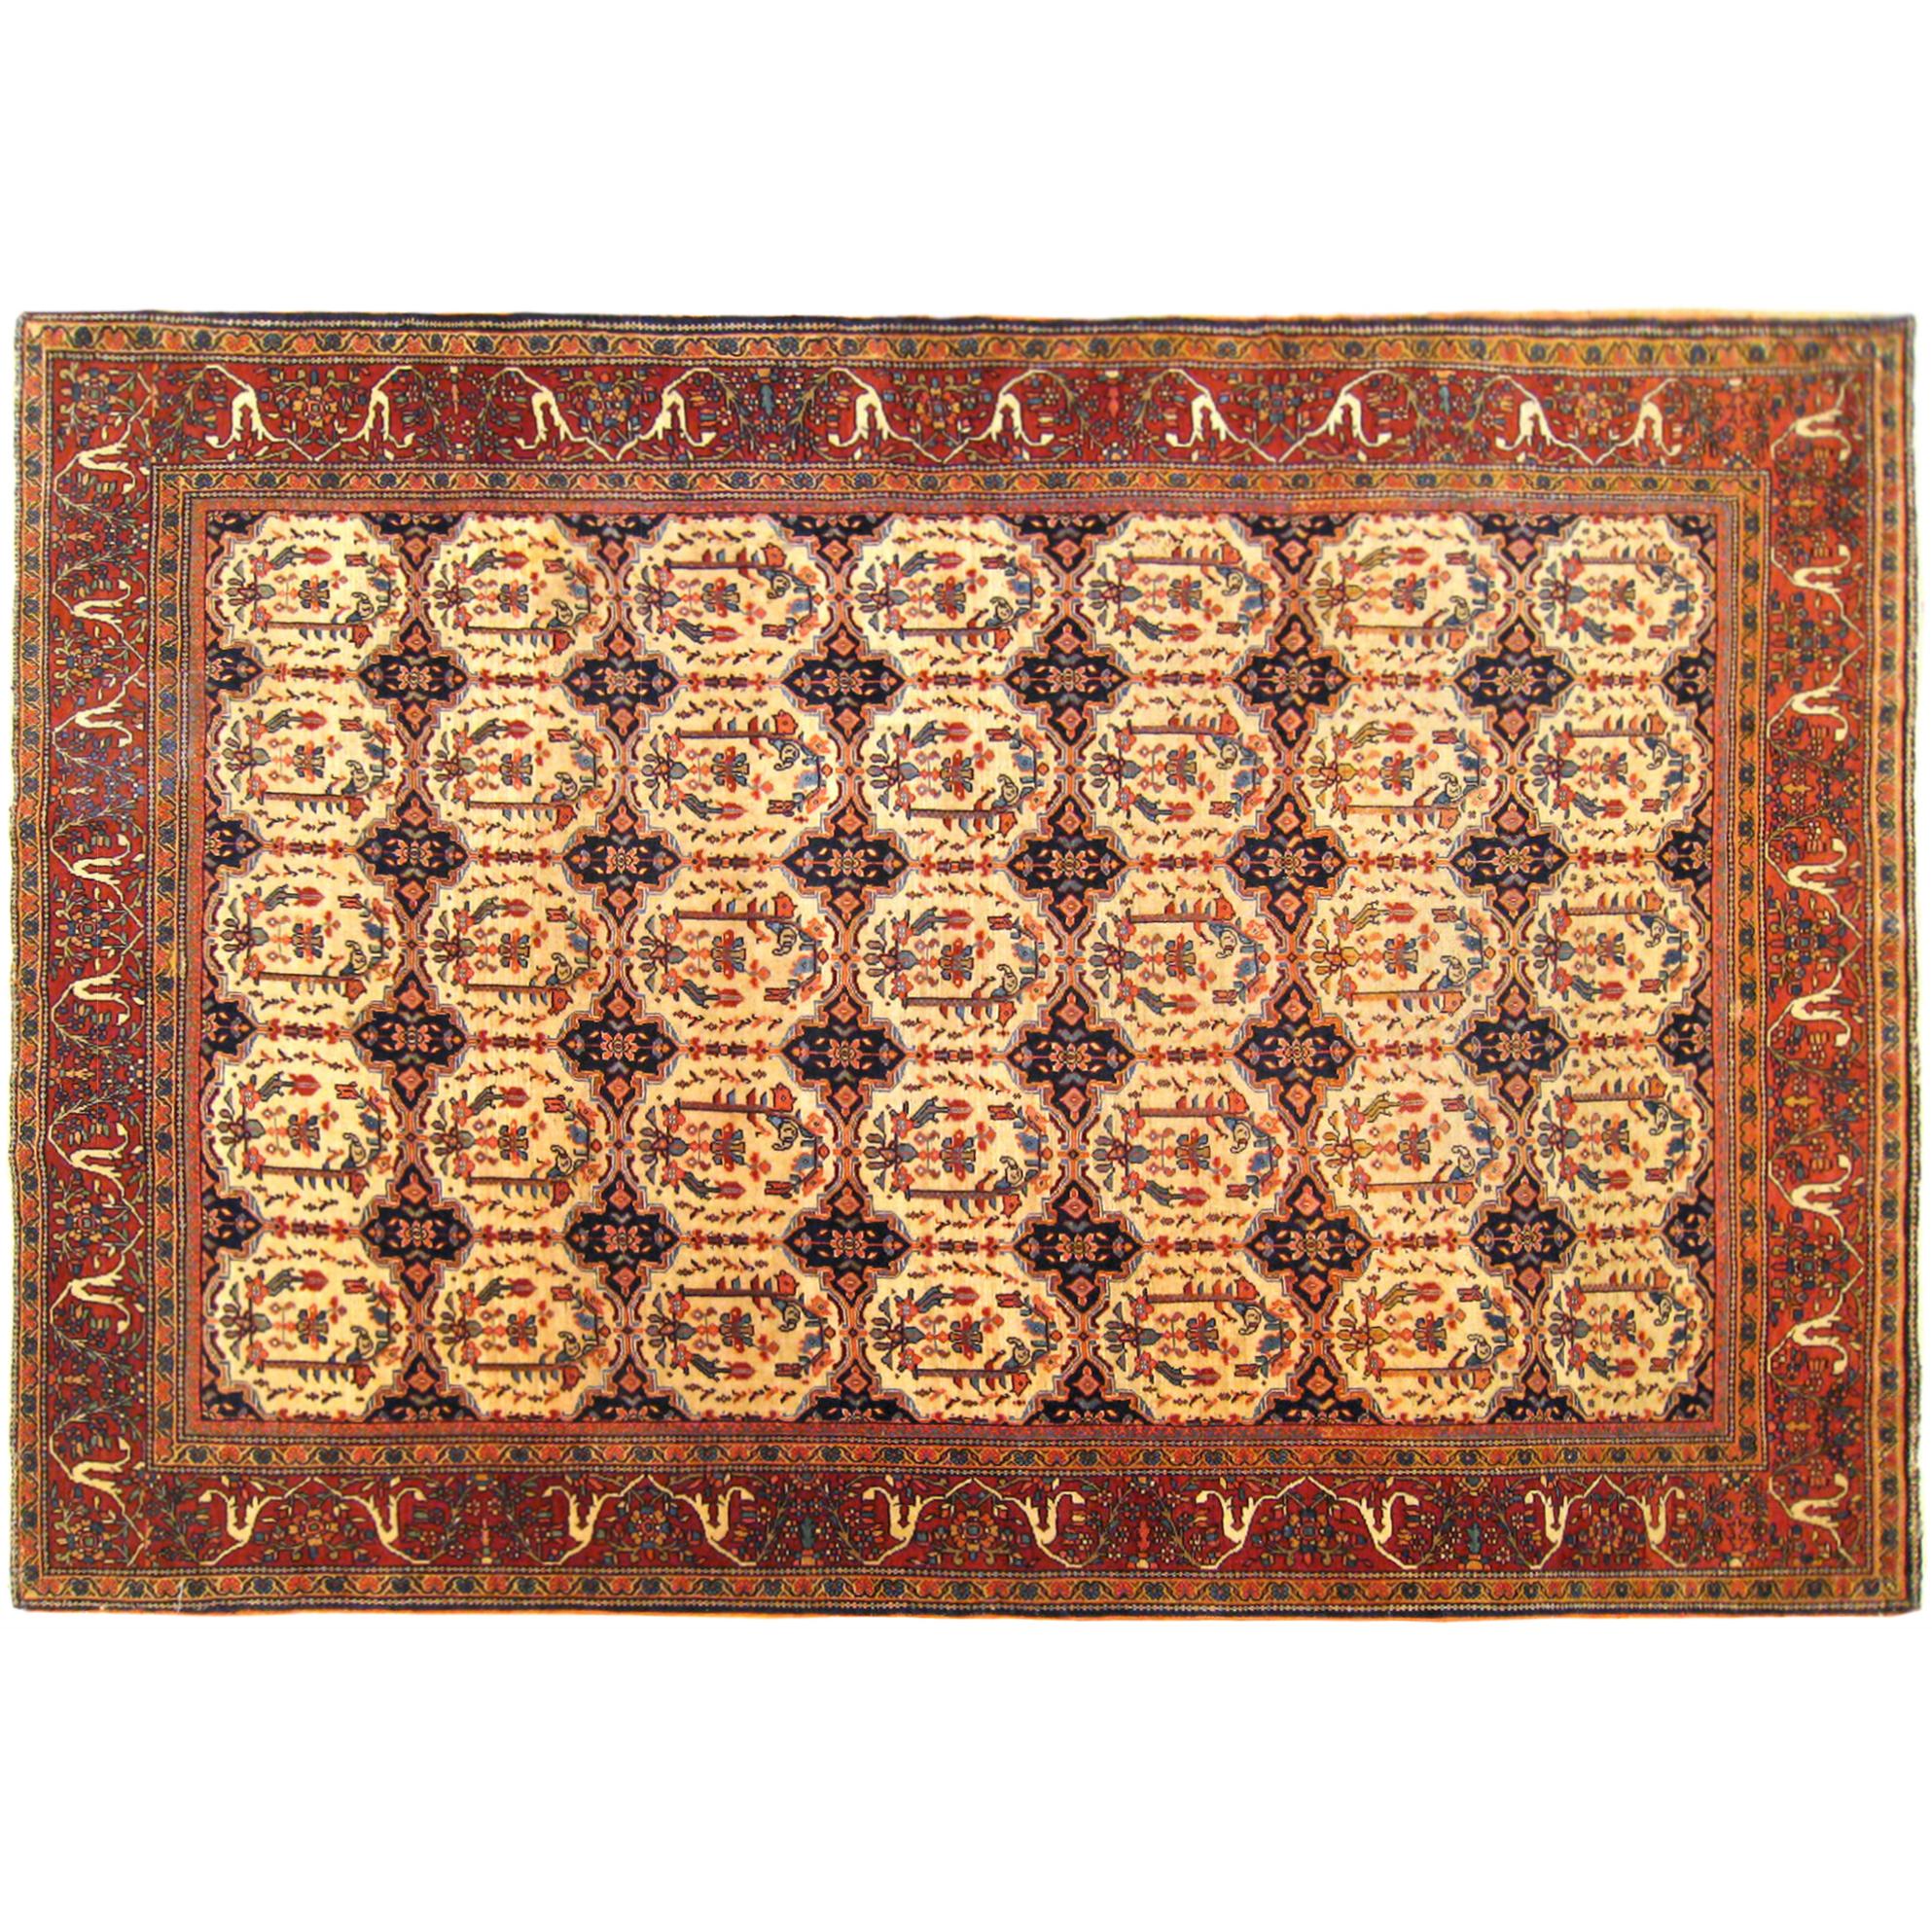 Antique Persian Ferahan Sarouk Oriental Carpet, in Small Size with Ivory Circles